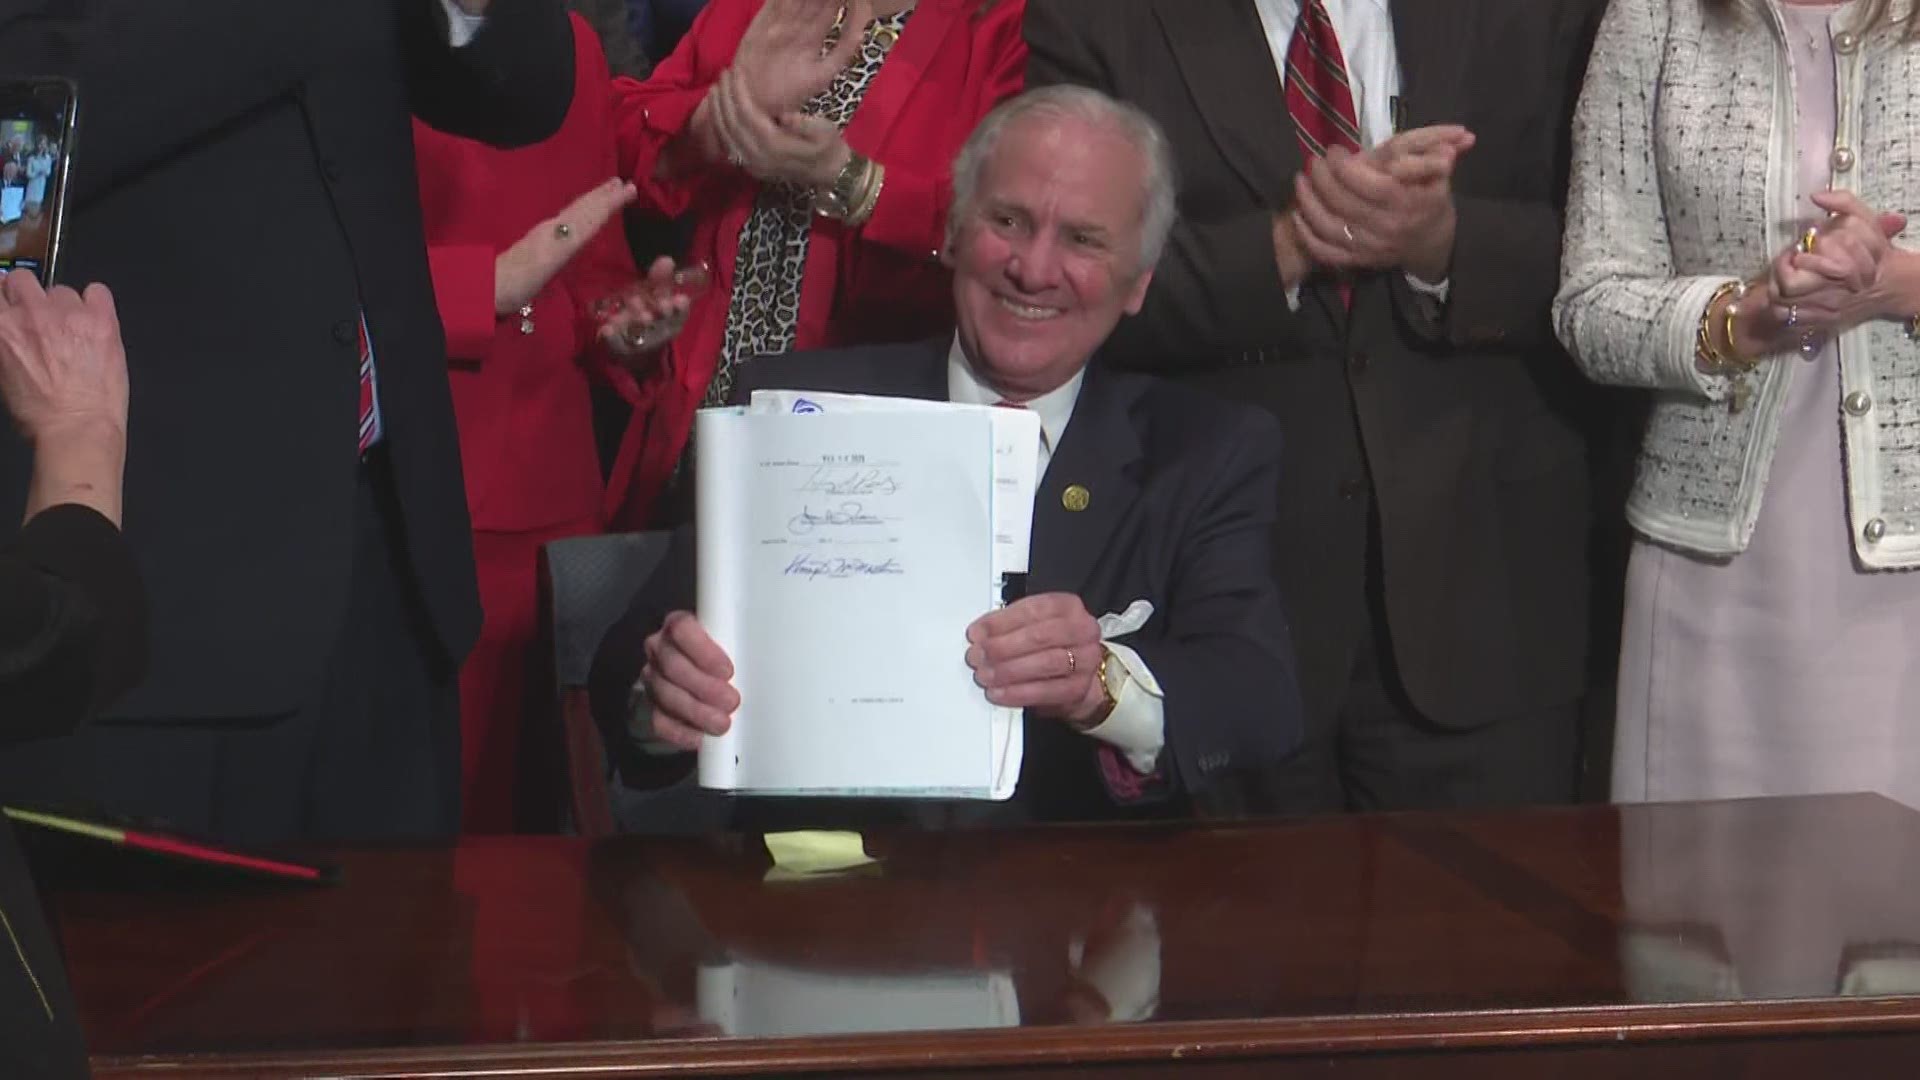 South Carolina Gov. Henry McMaster signed the fetal heartbeat abortion bill into law Thursday afternoon.